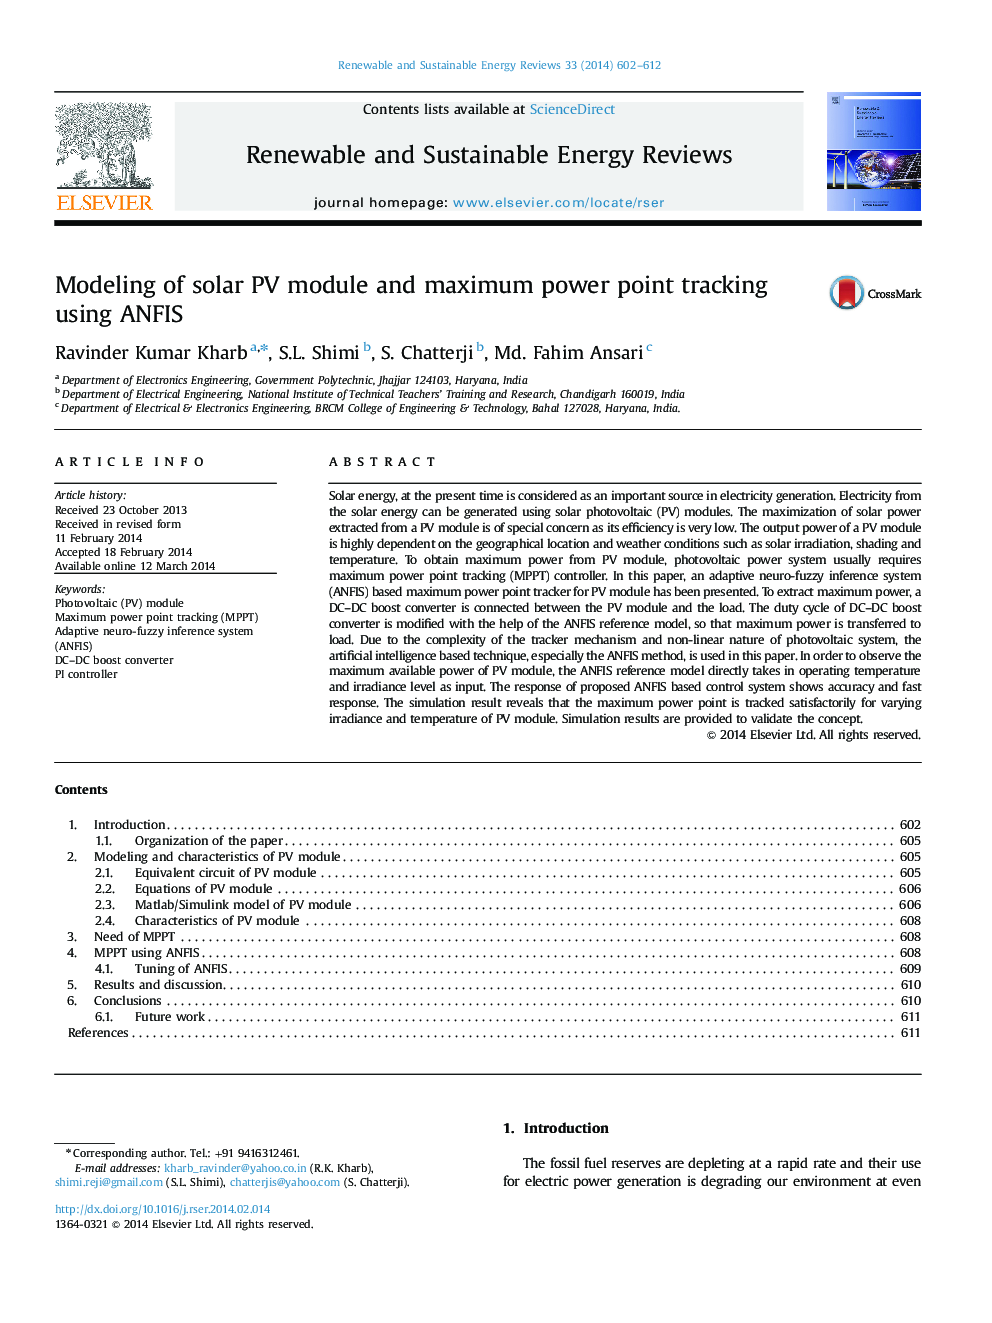 Modeling of solar PV module and maximum power point tracking using ANFIS